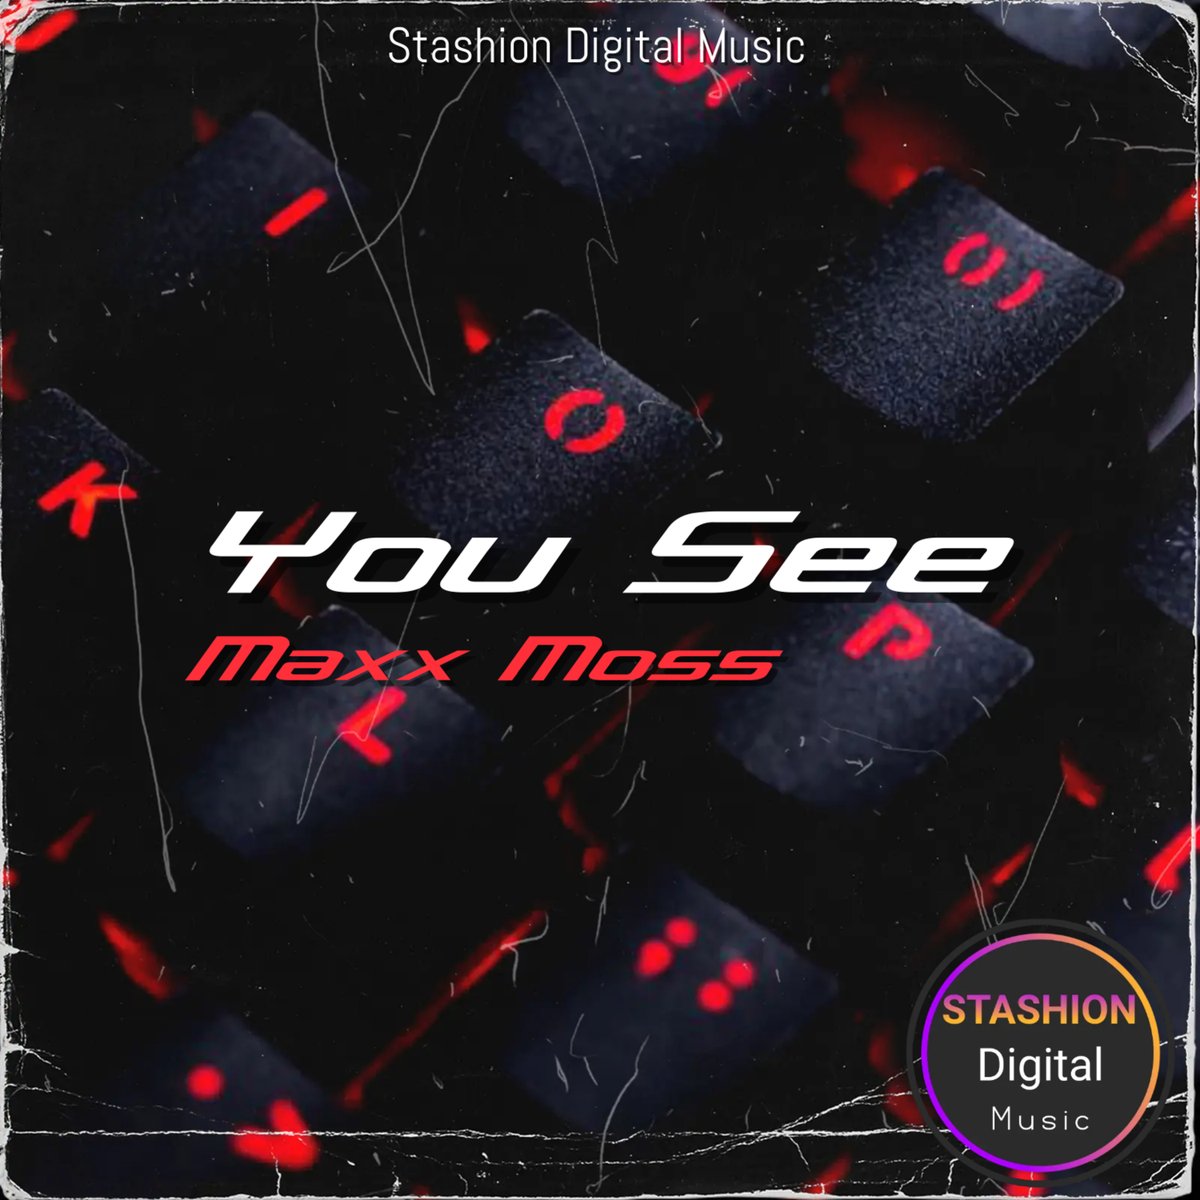 #SMWFeaturedRelease 🎵

💽 Maxx Moss – You See

🎶 Genres: House, Future House
🪩 Label: Stashion Digital Music

🎧 Listen to You See on any streaming services!

#housemusic #electronicmusic #musicdistribution